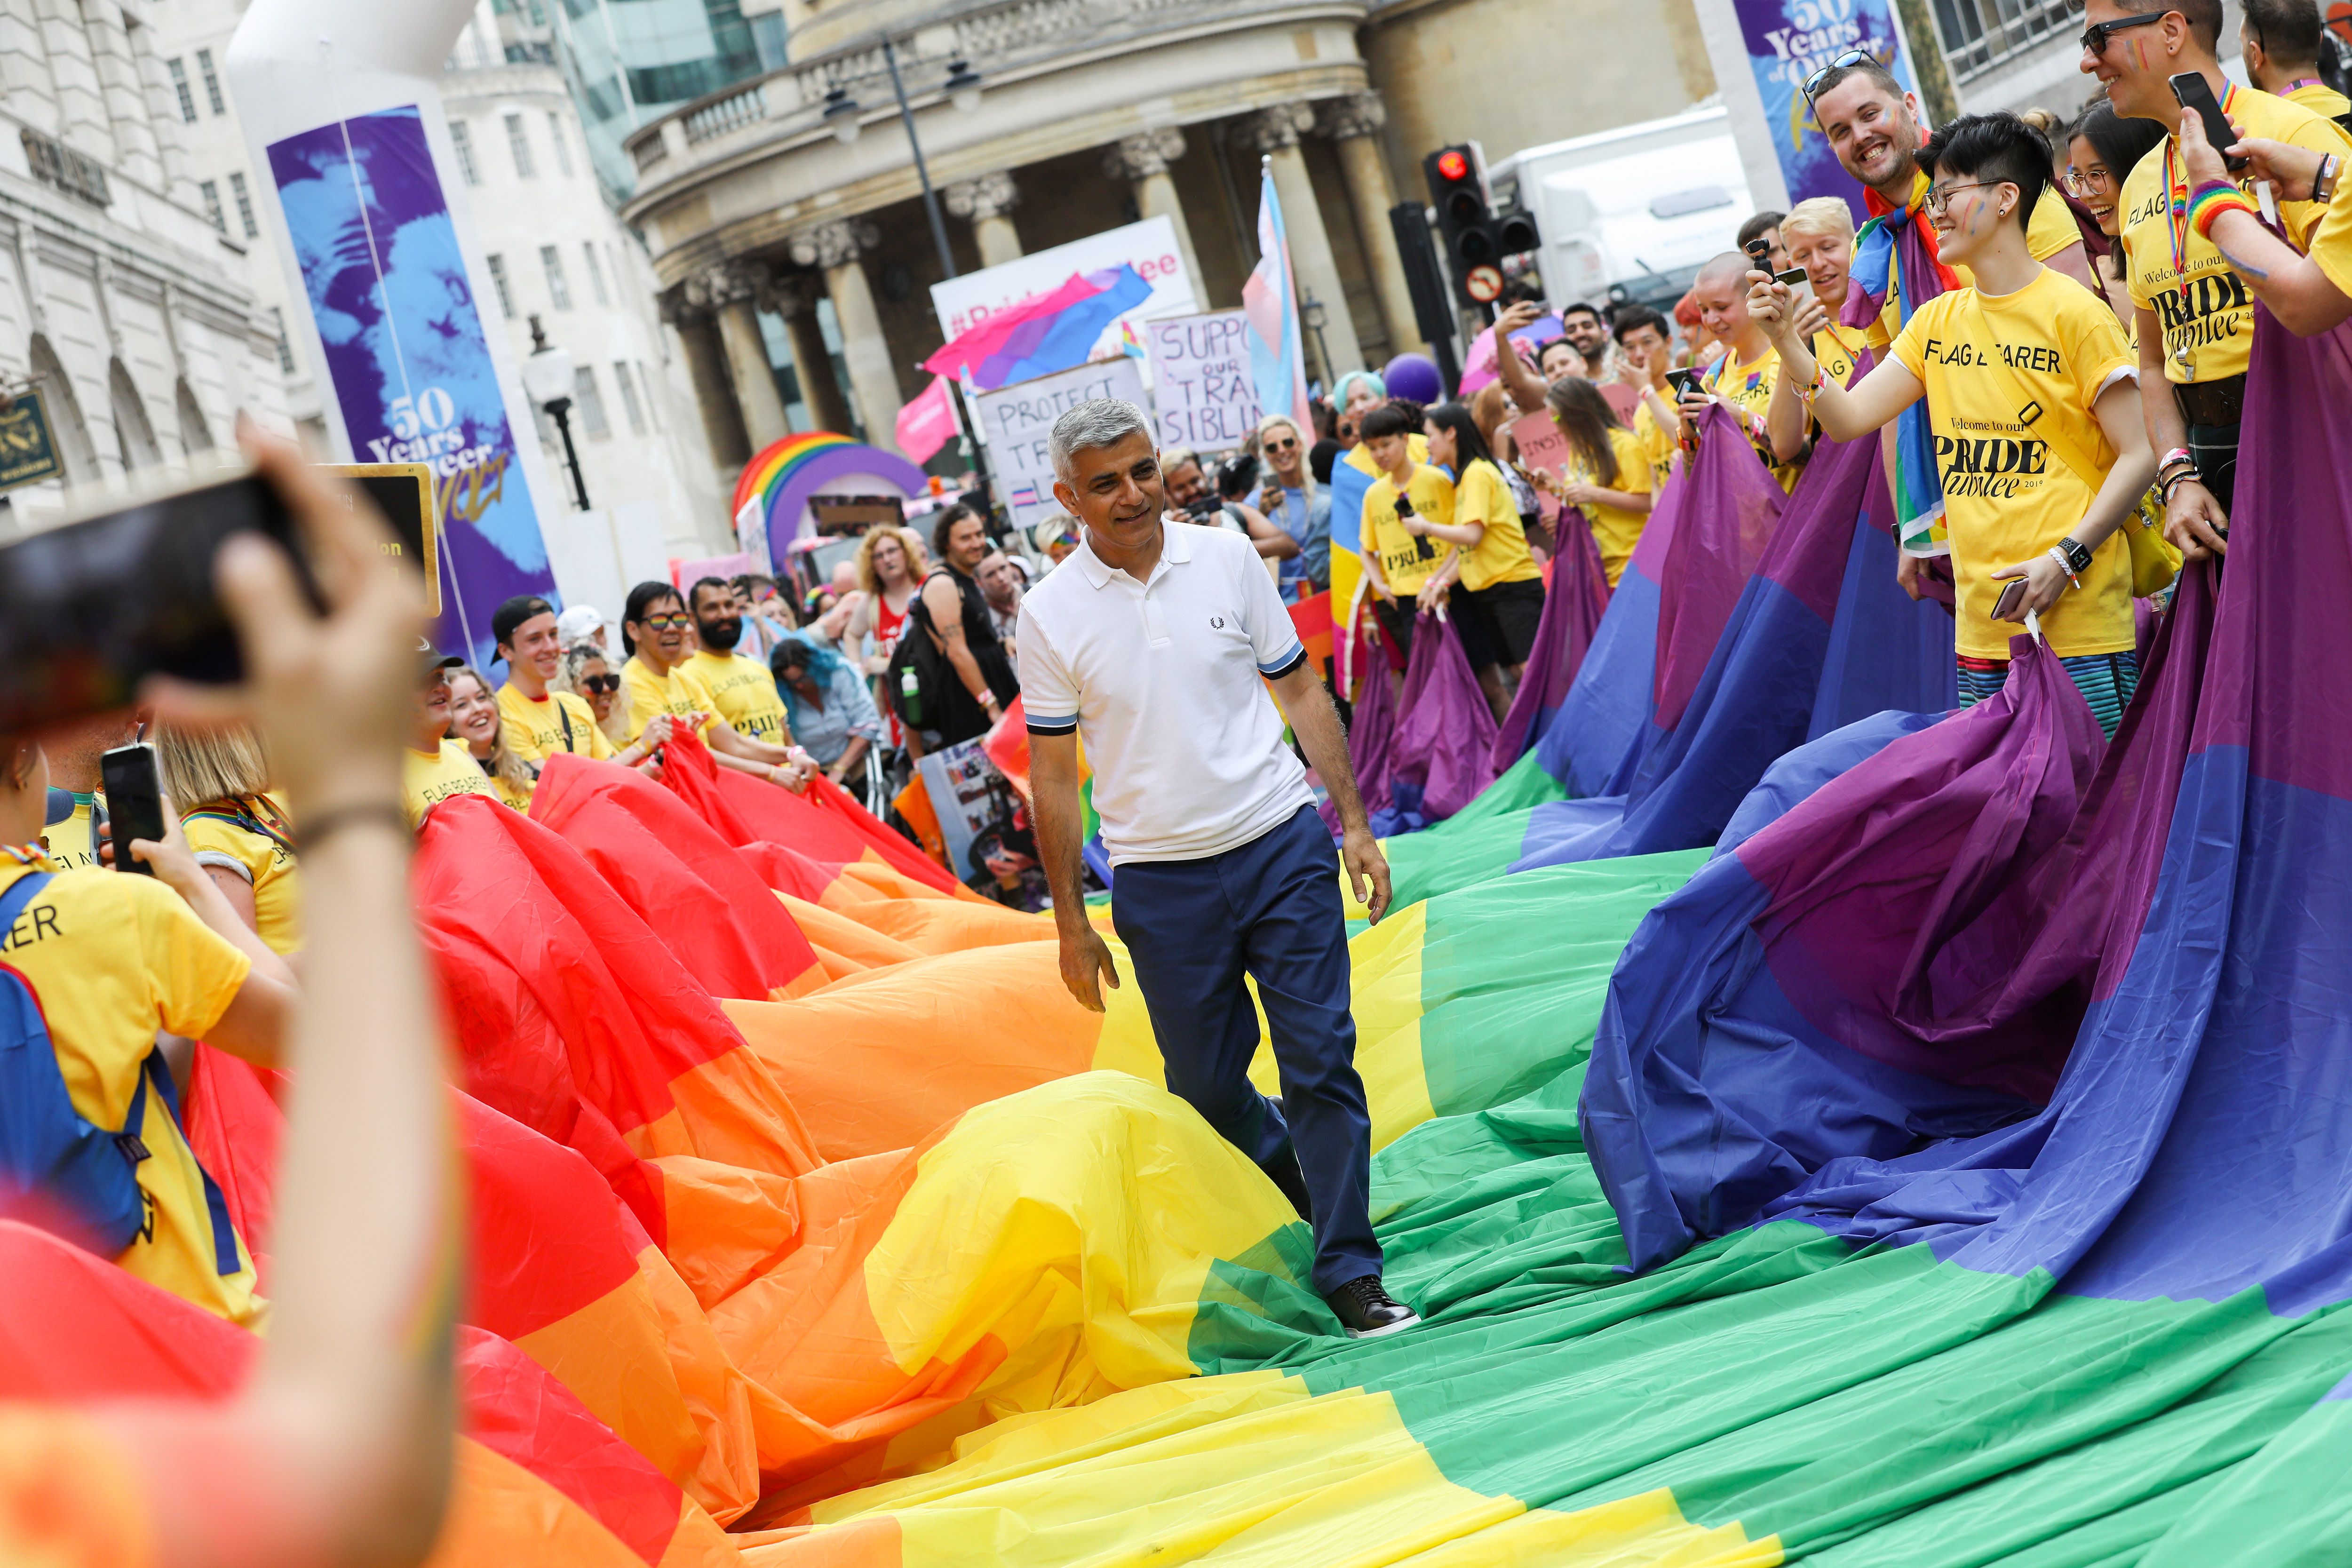 London Pride: When Is The Annual Event And Where Is It?